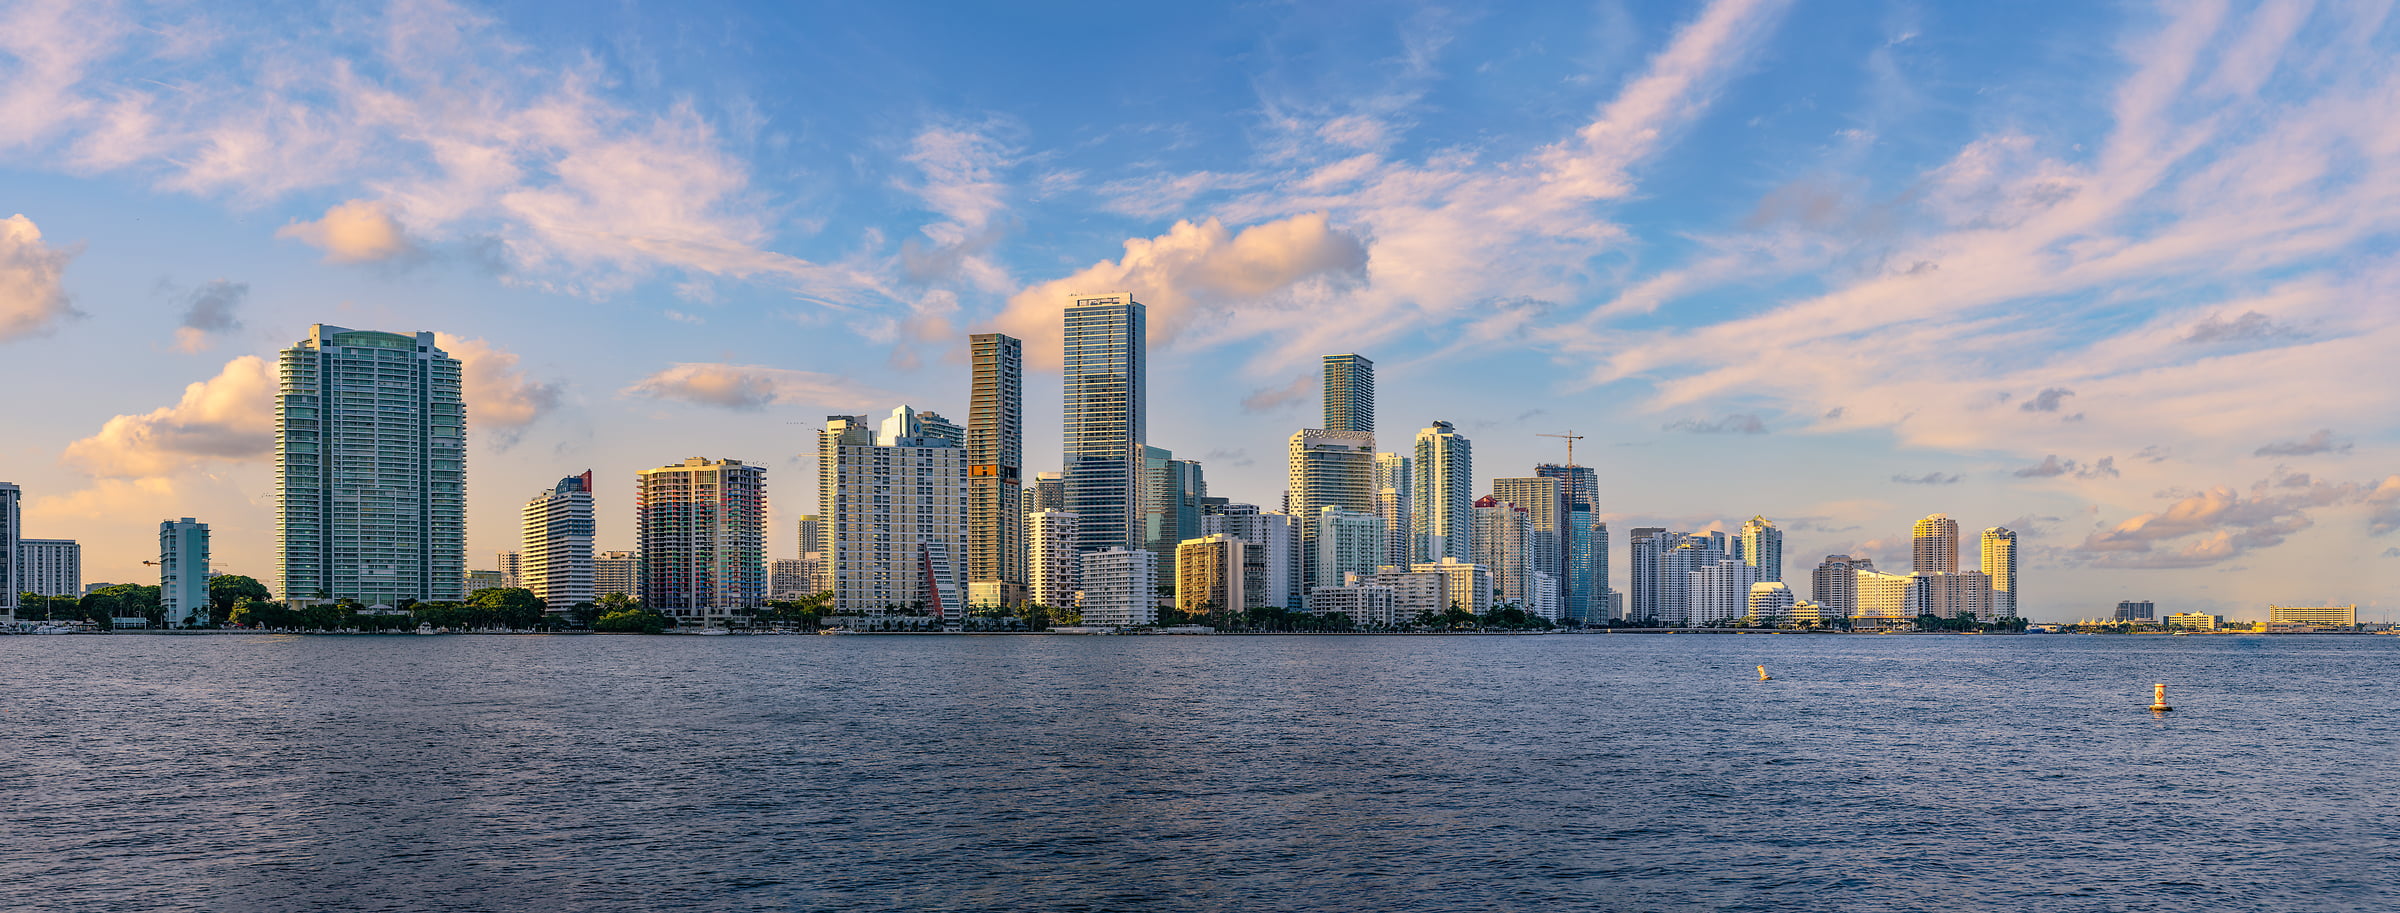 749 megapixels! A very high resolution, large-format VAST photo print of the Miami skyline at sunset; photograph created by Chris Blake at Miami, Florida.